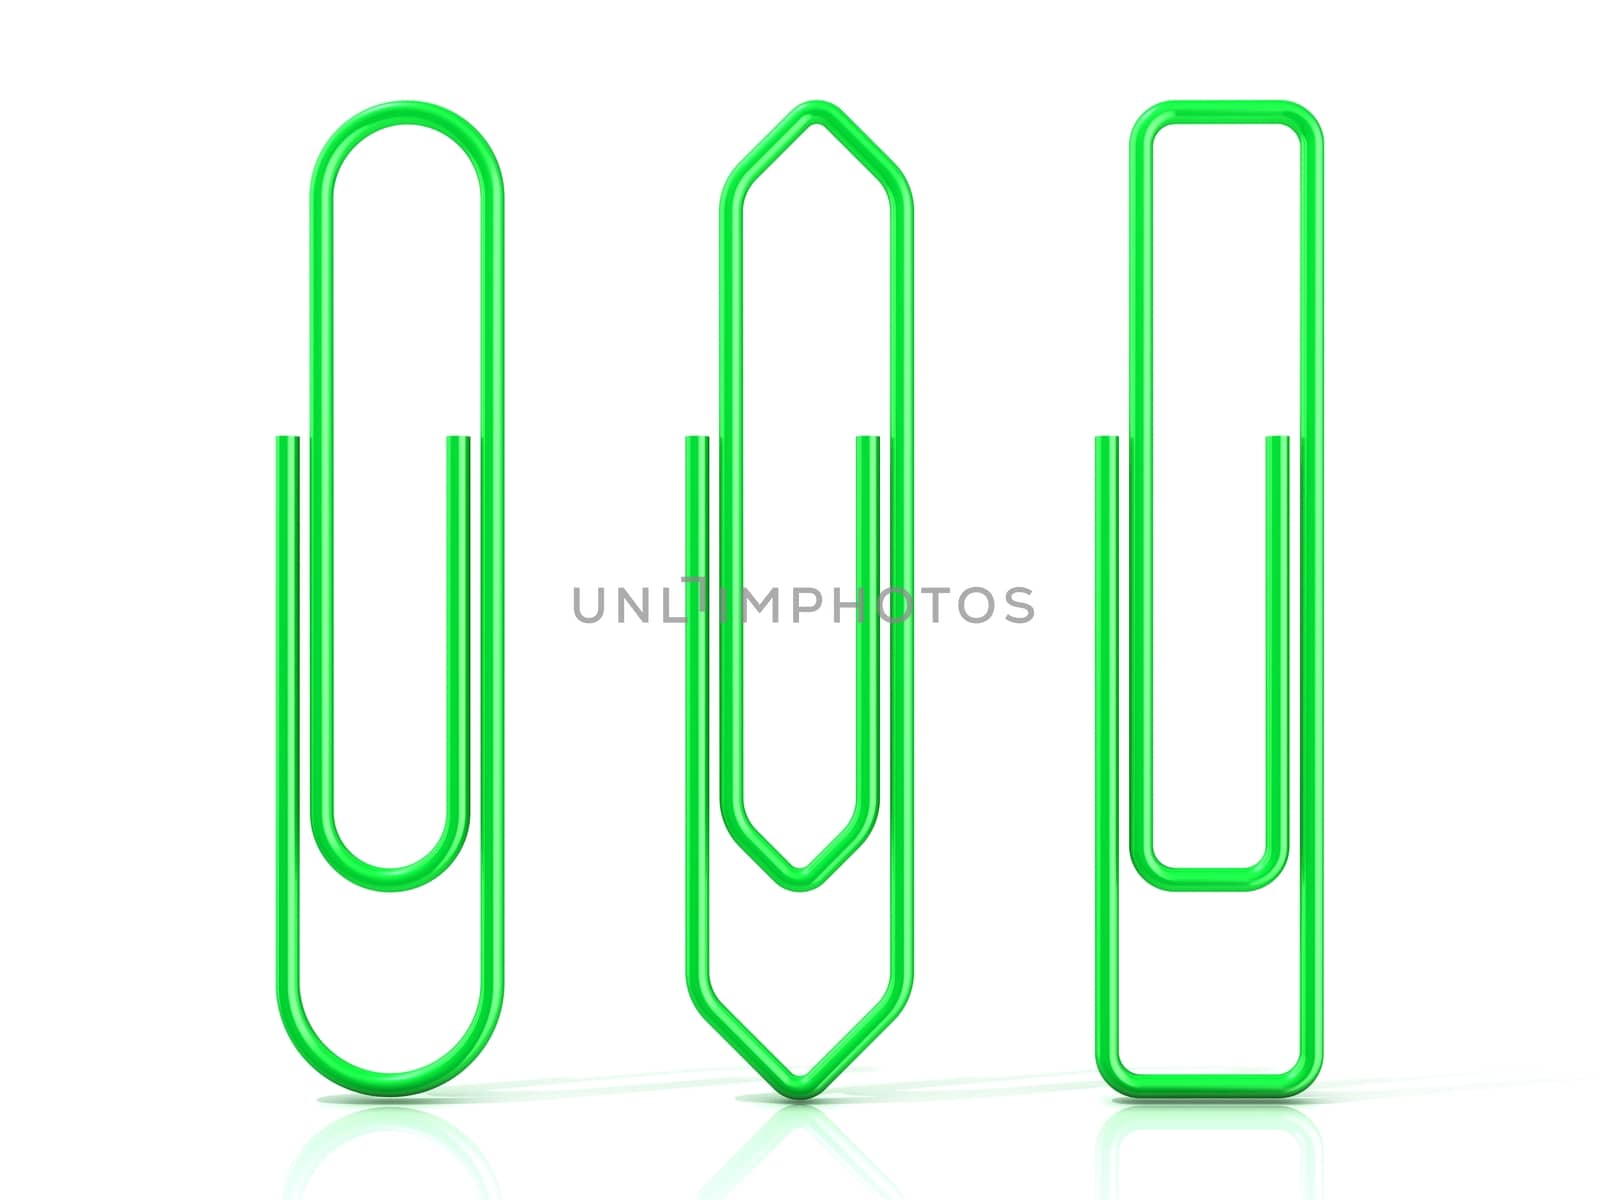 Paper clips isolated over white background, Three basic shapes. Green